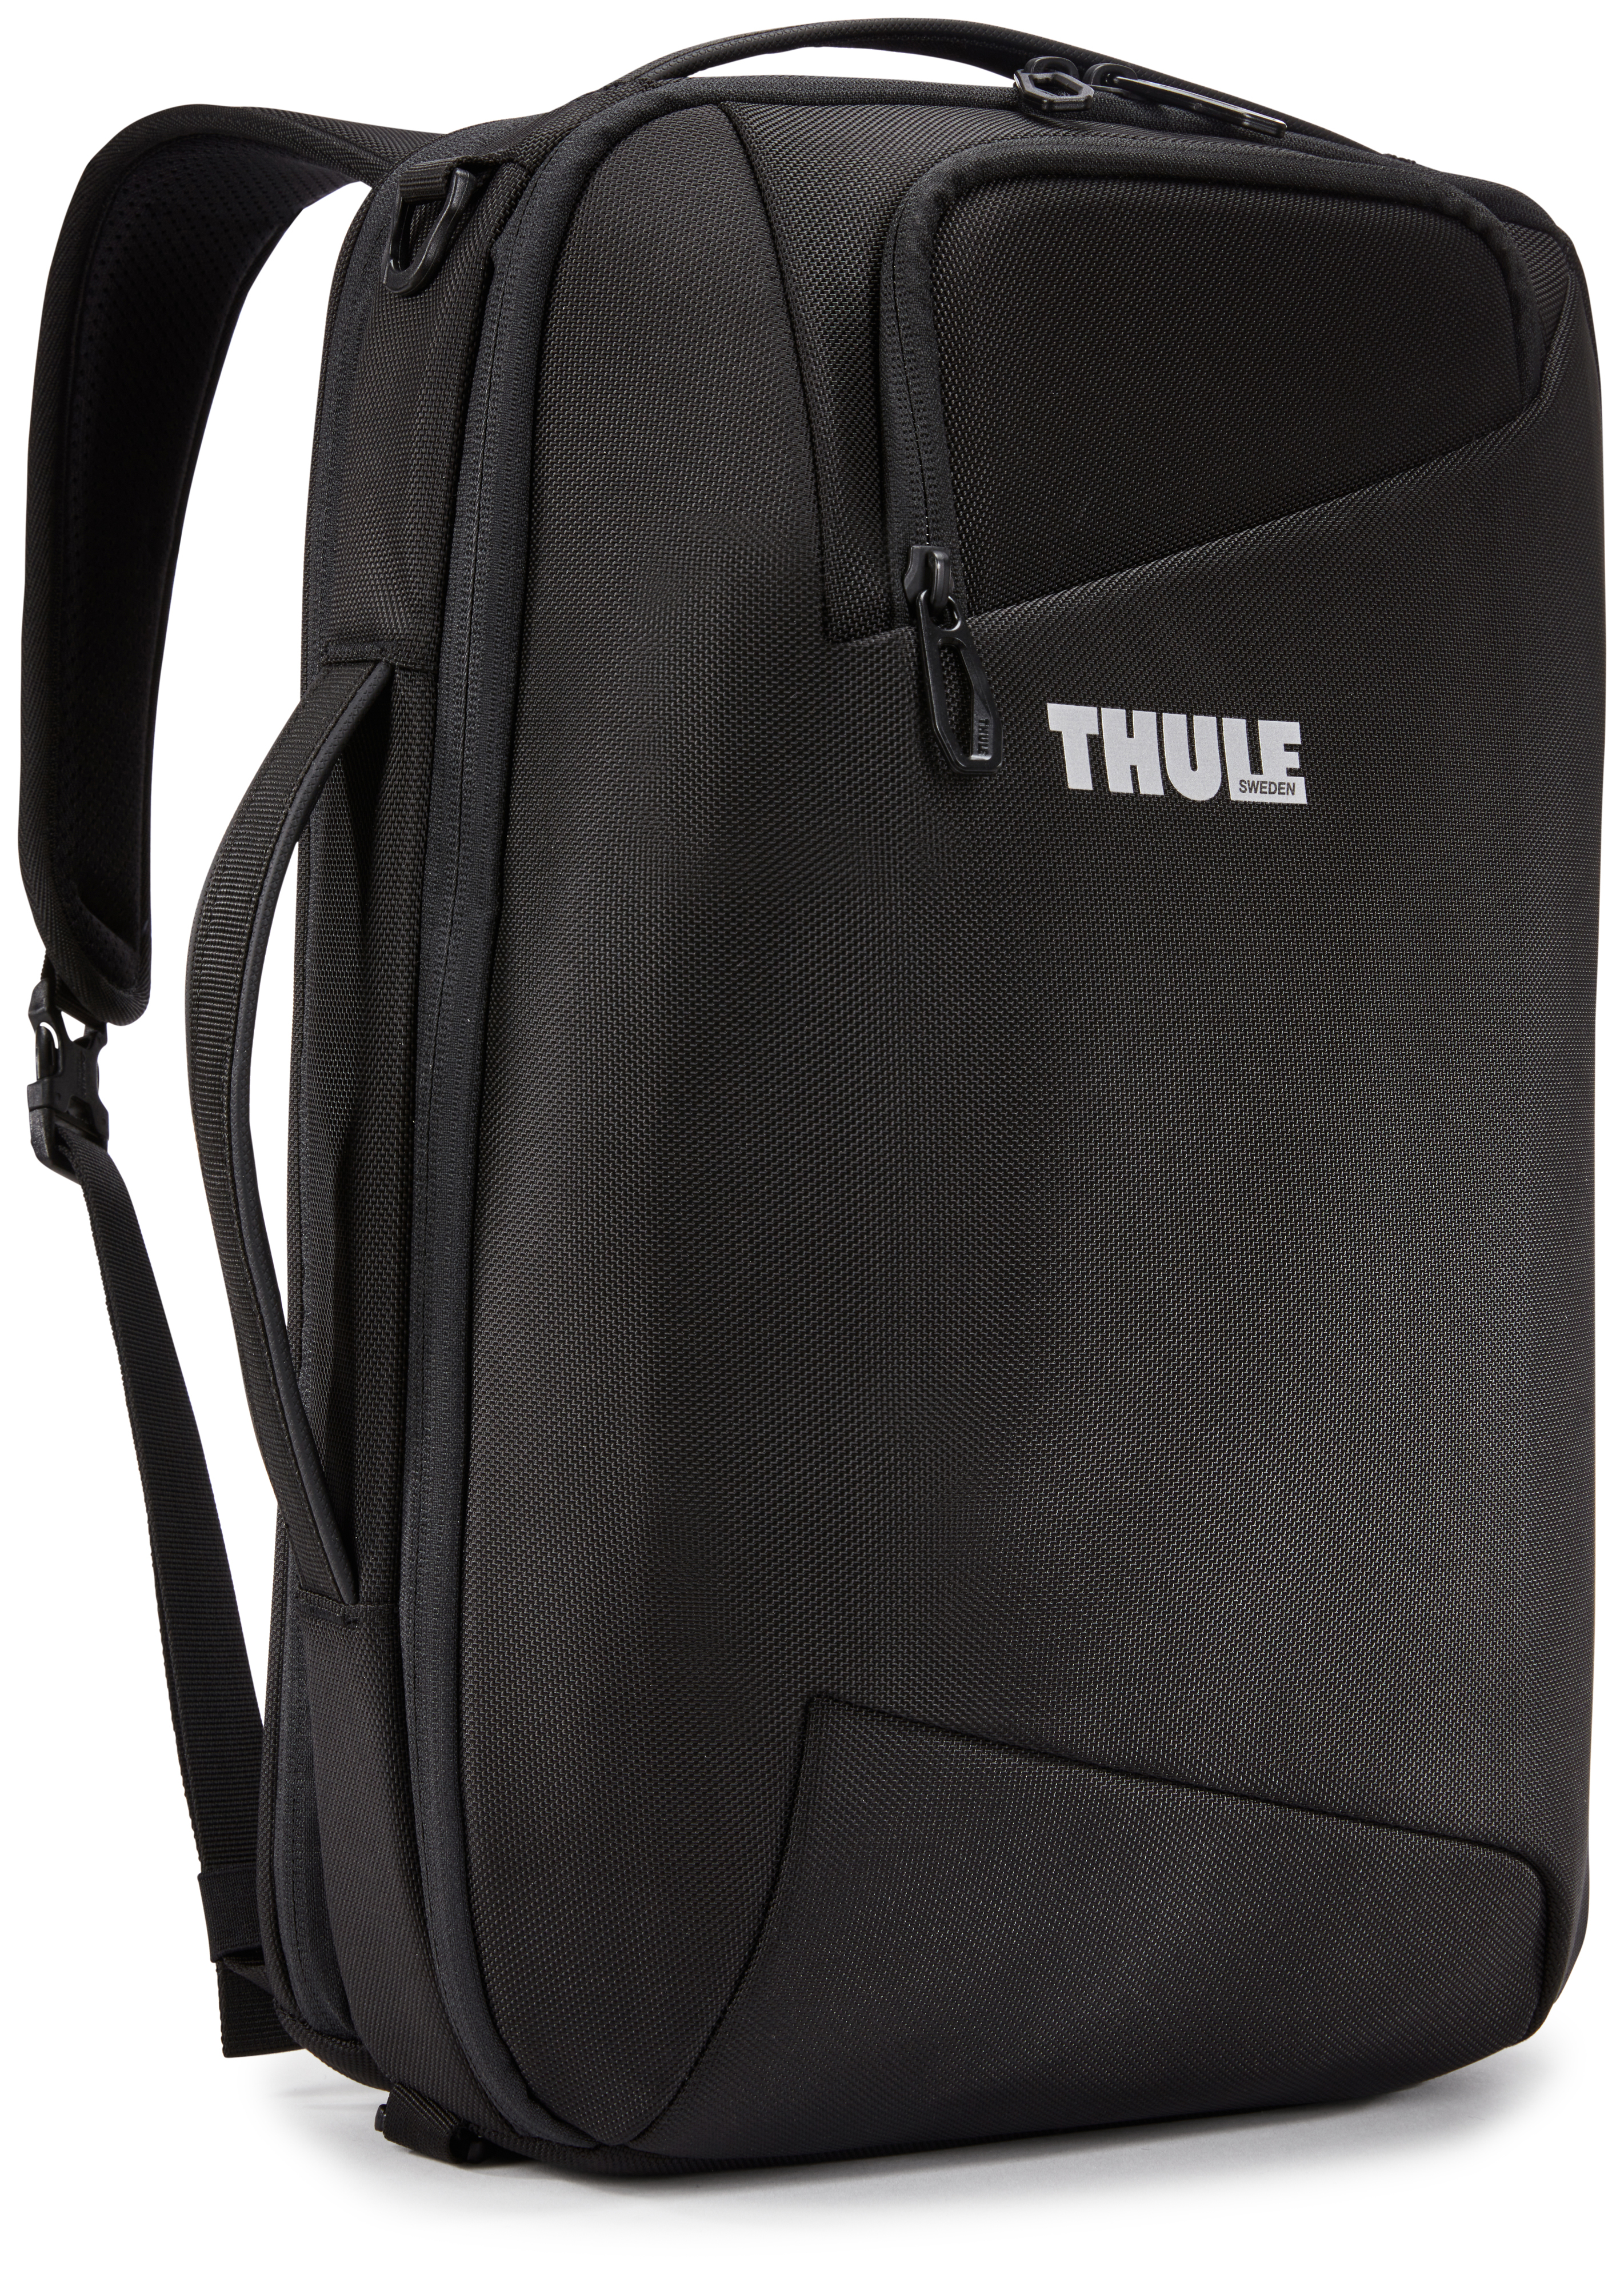 Thule Accent TACLB2116 - Black